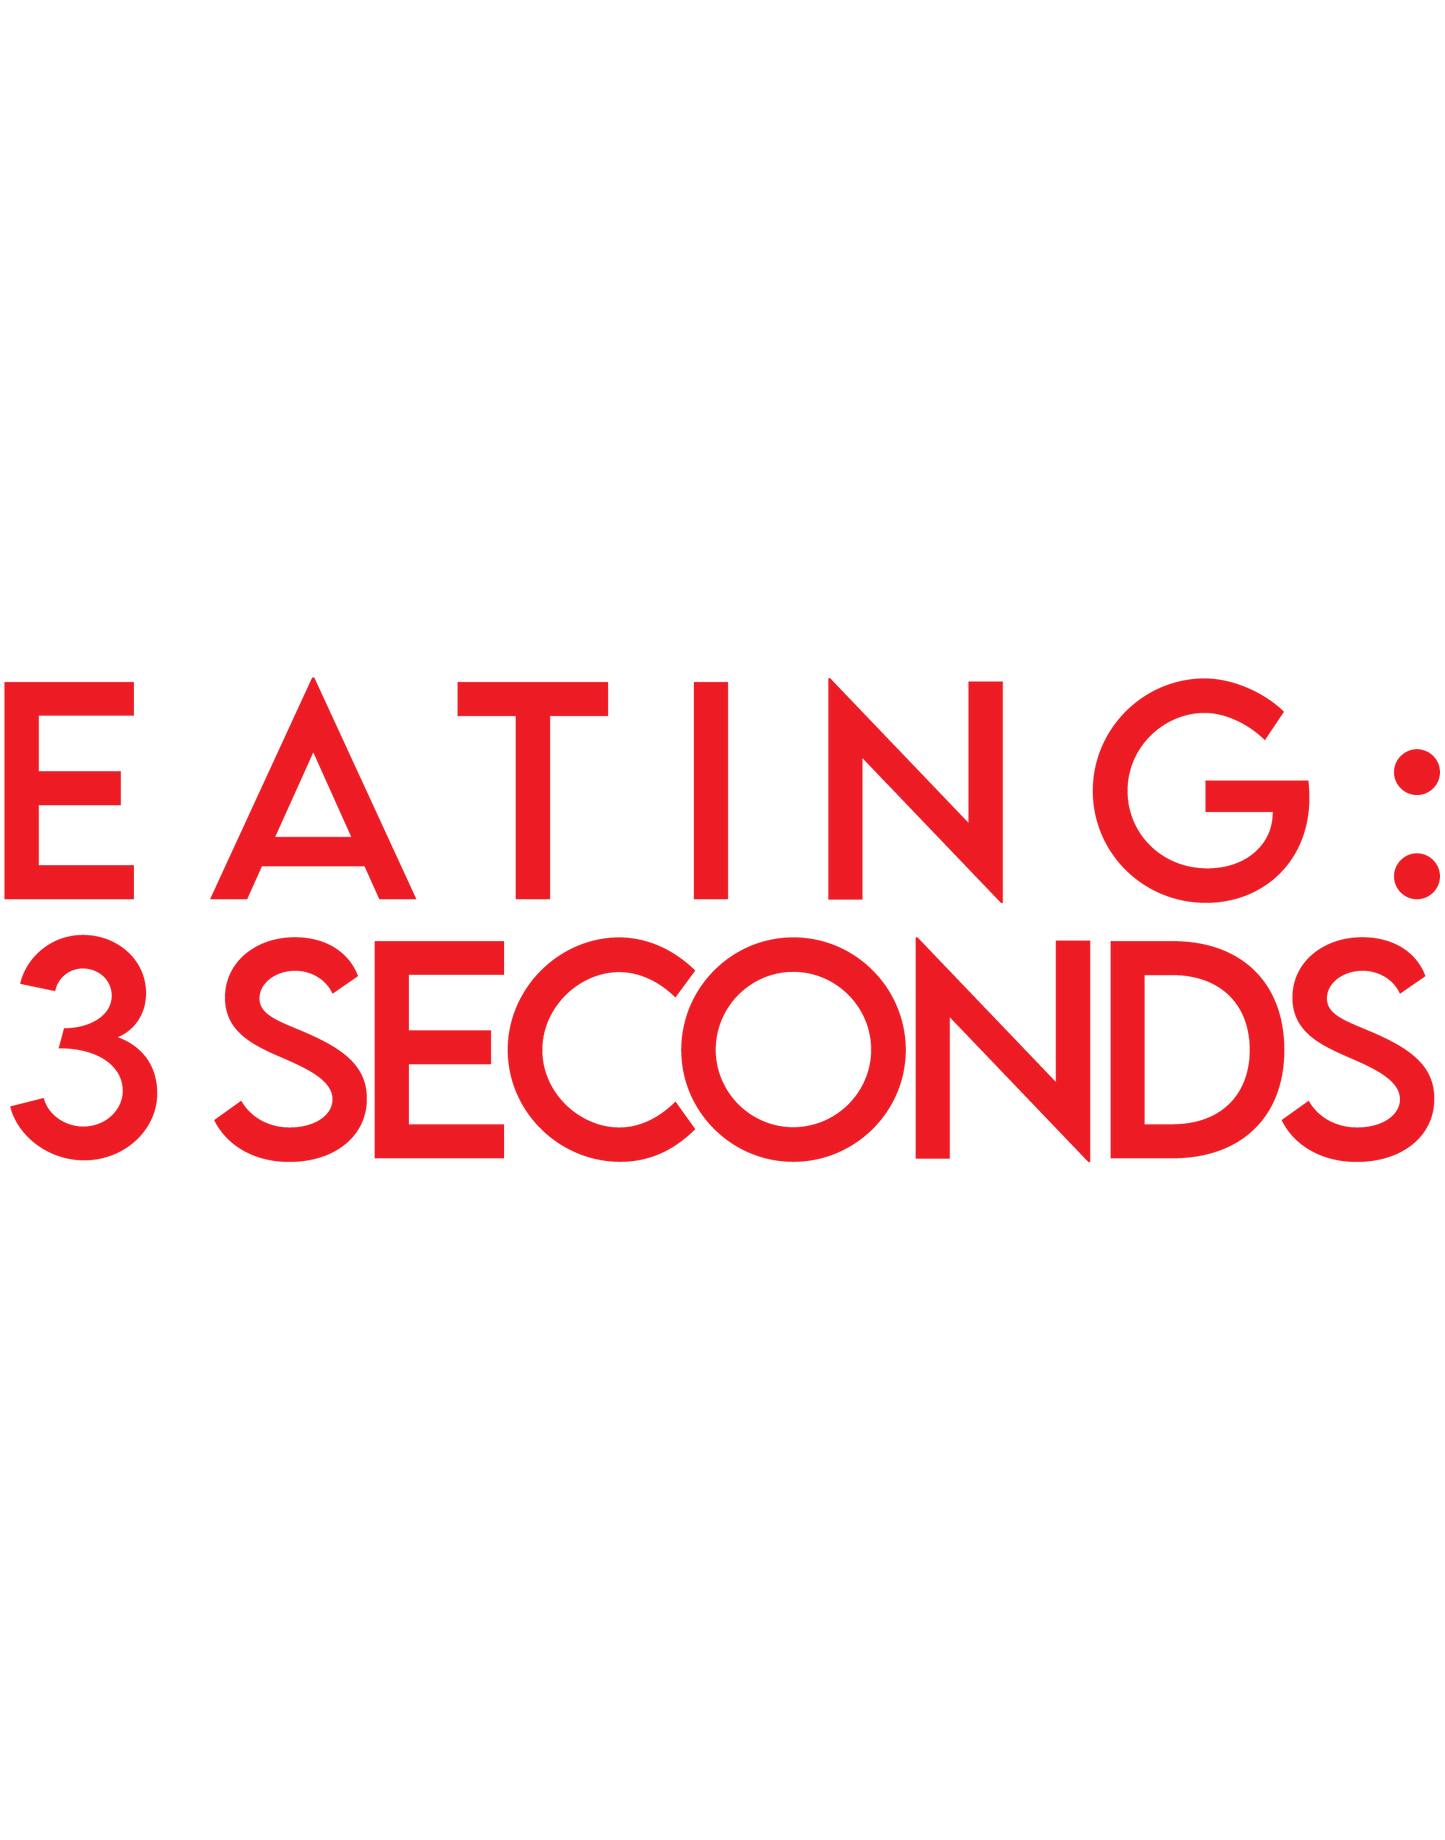 Cooking 6 Hours, Eating 3 Seconds